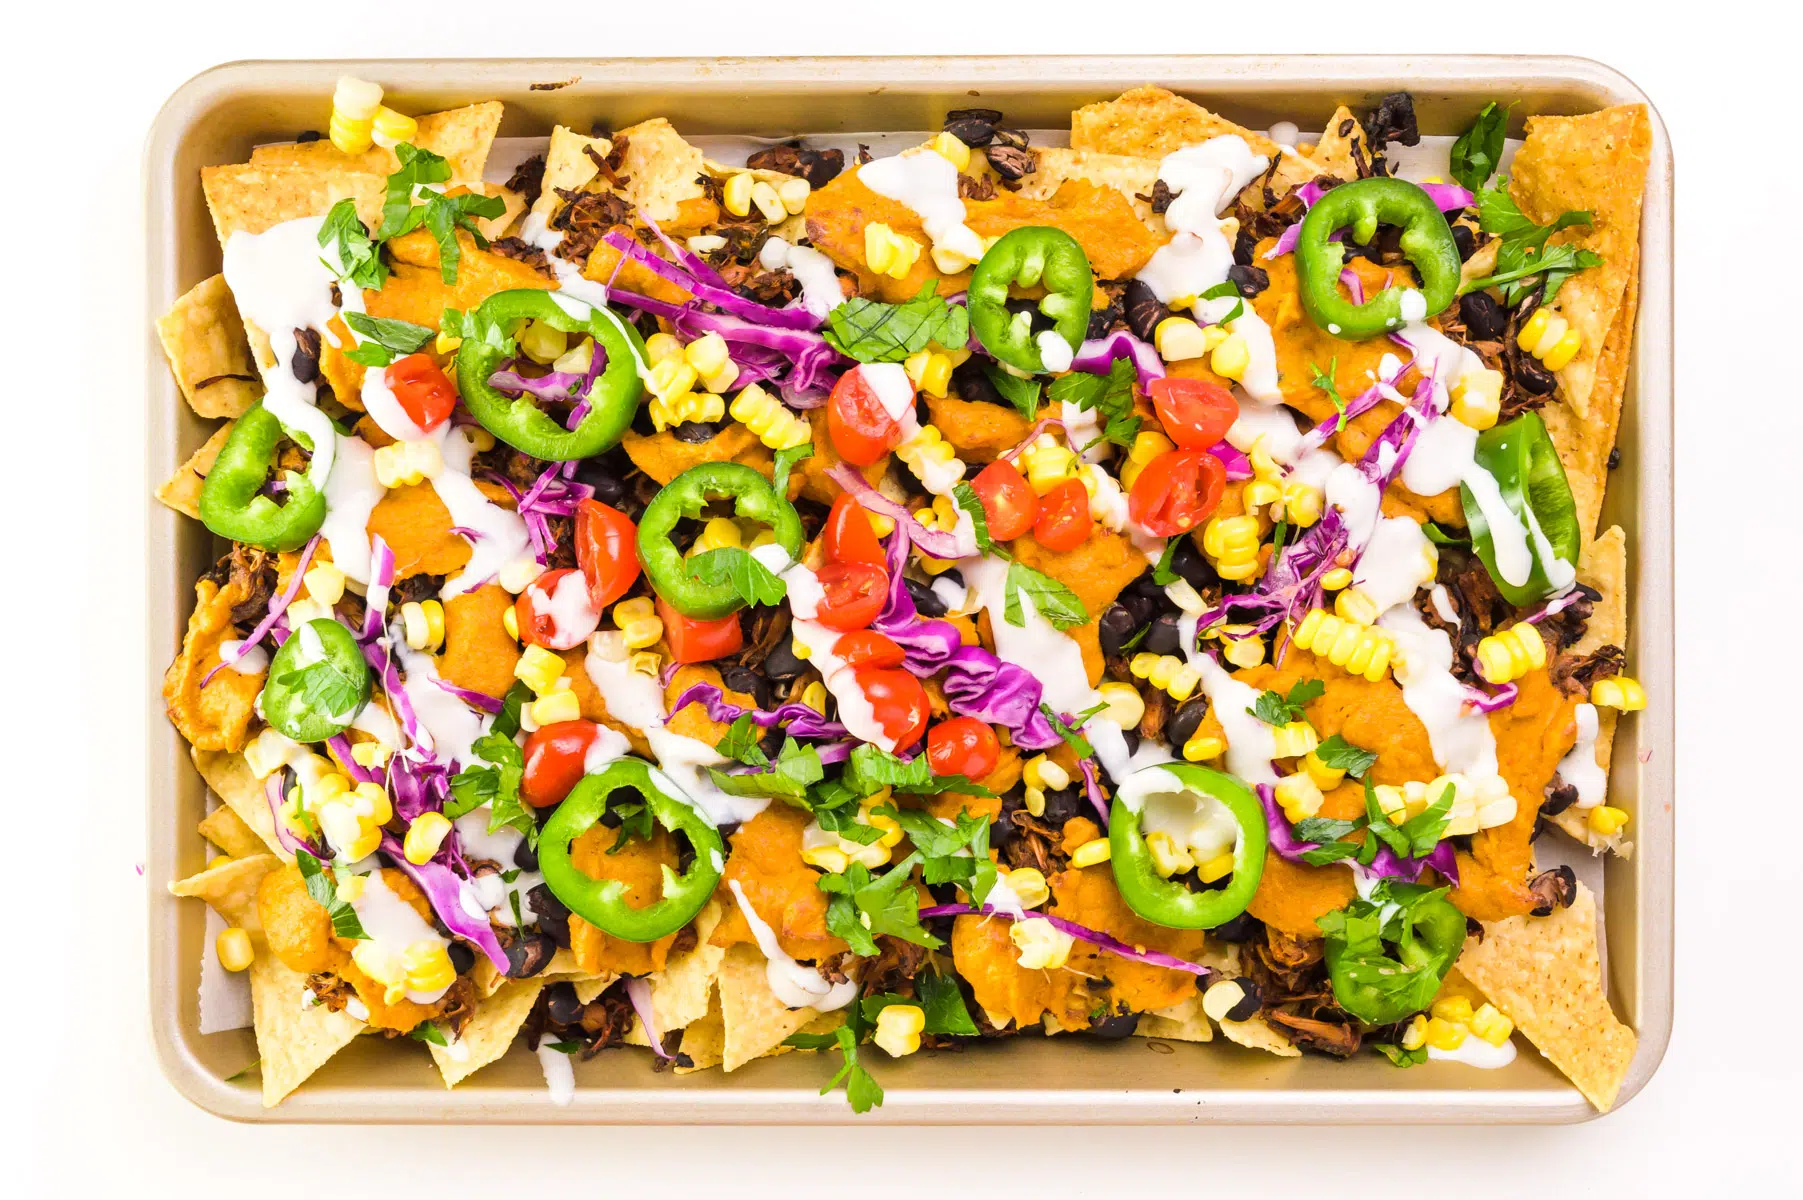 Looking down on a baking dish loaded with jackfruit nachos. It's drizzled with sour cream on top.